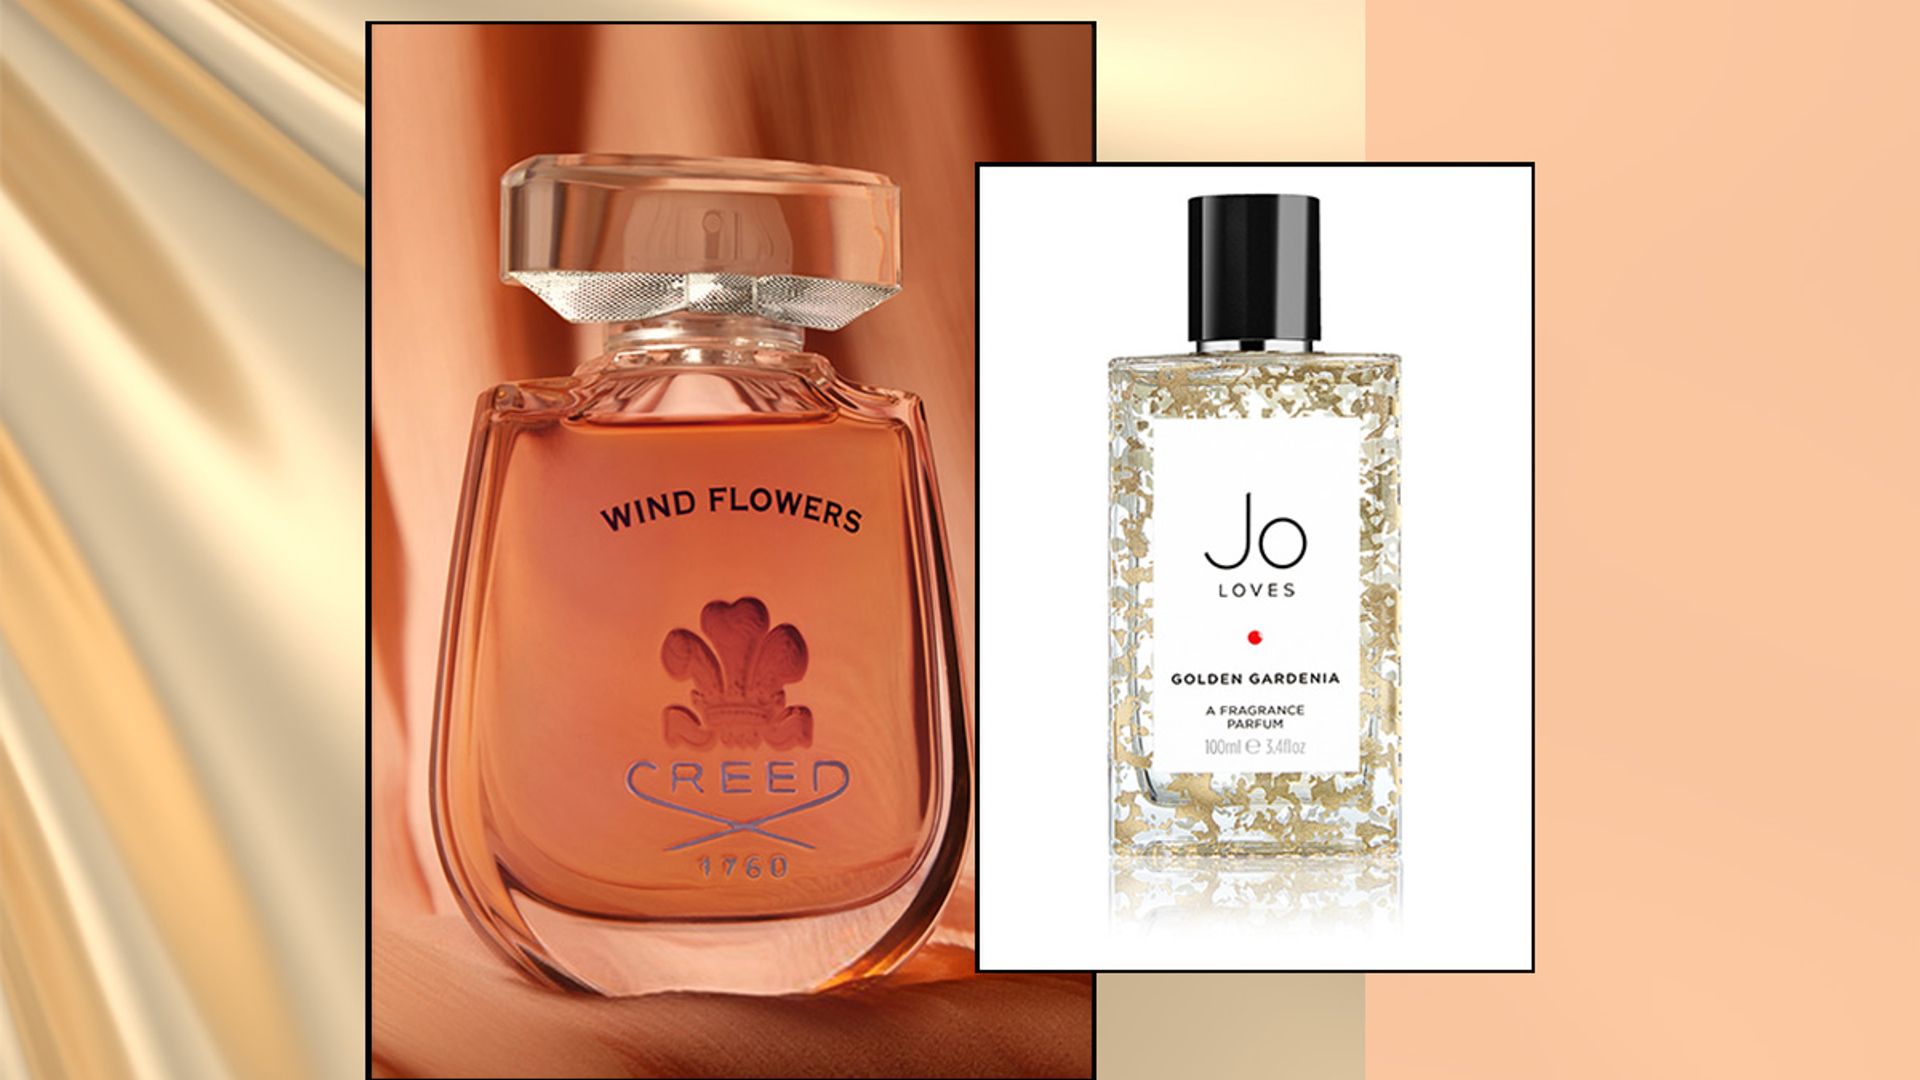 22 best new perfumes for women 2022: The talked about fragrances from Tom Ford, Jo Malone, Estee Lauder & MORE